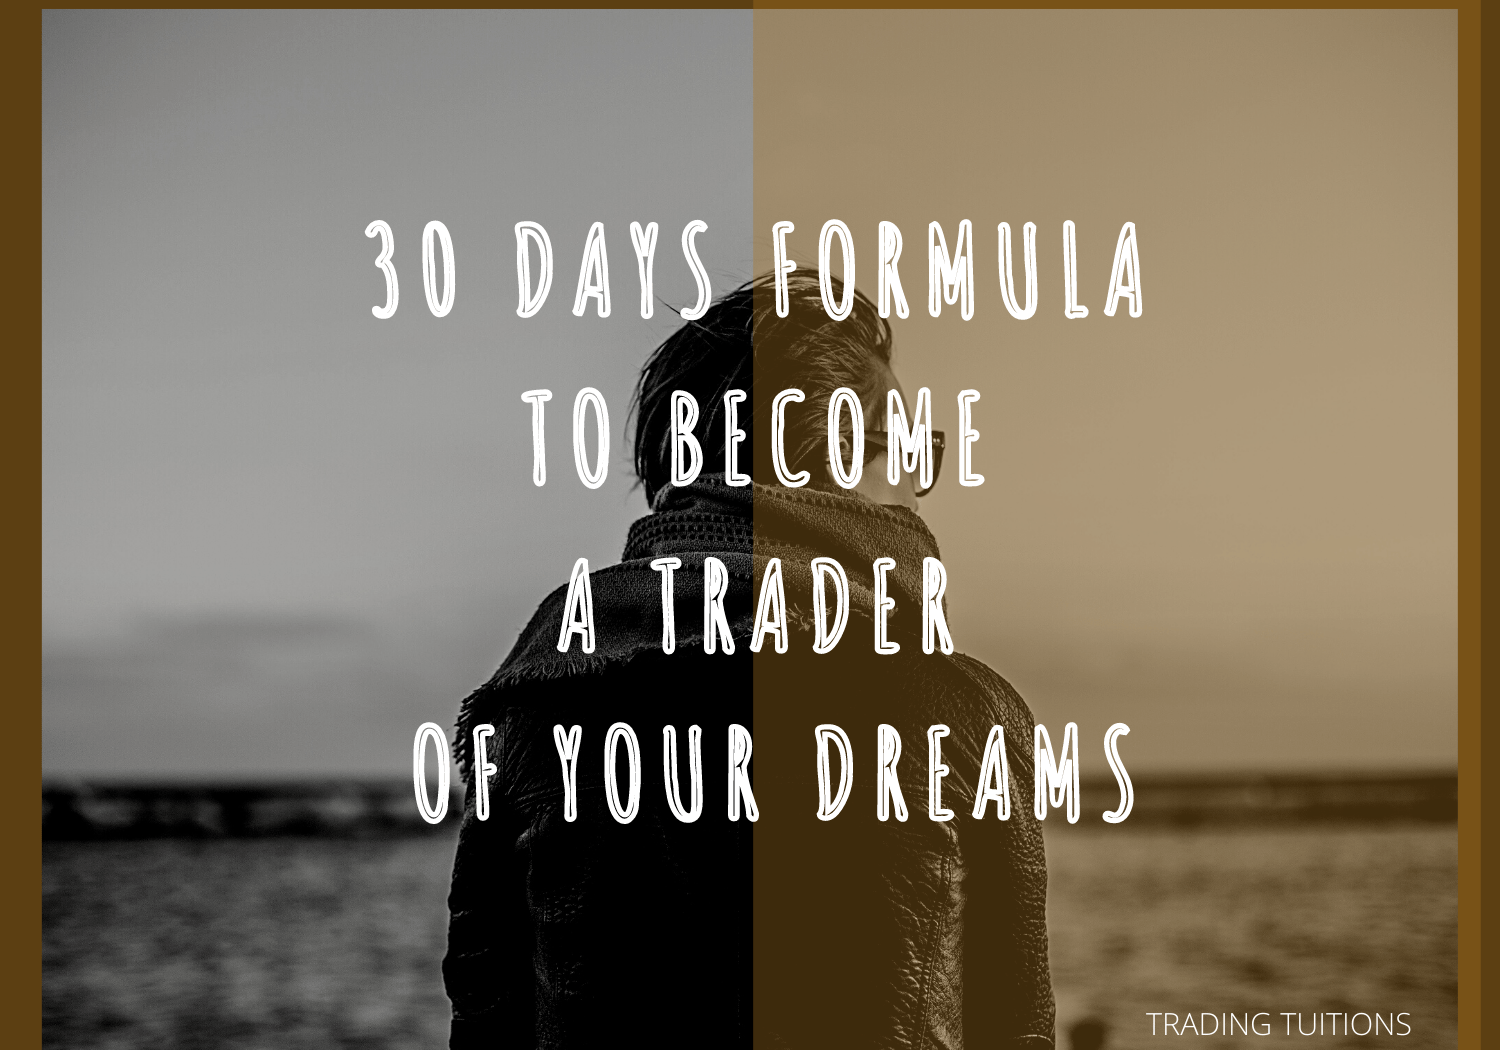 30 Days Formula to Become a Trader of your Dreams